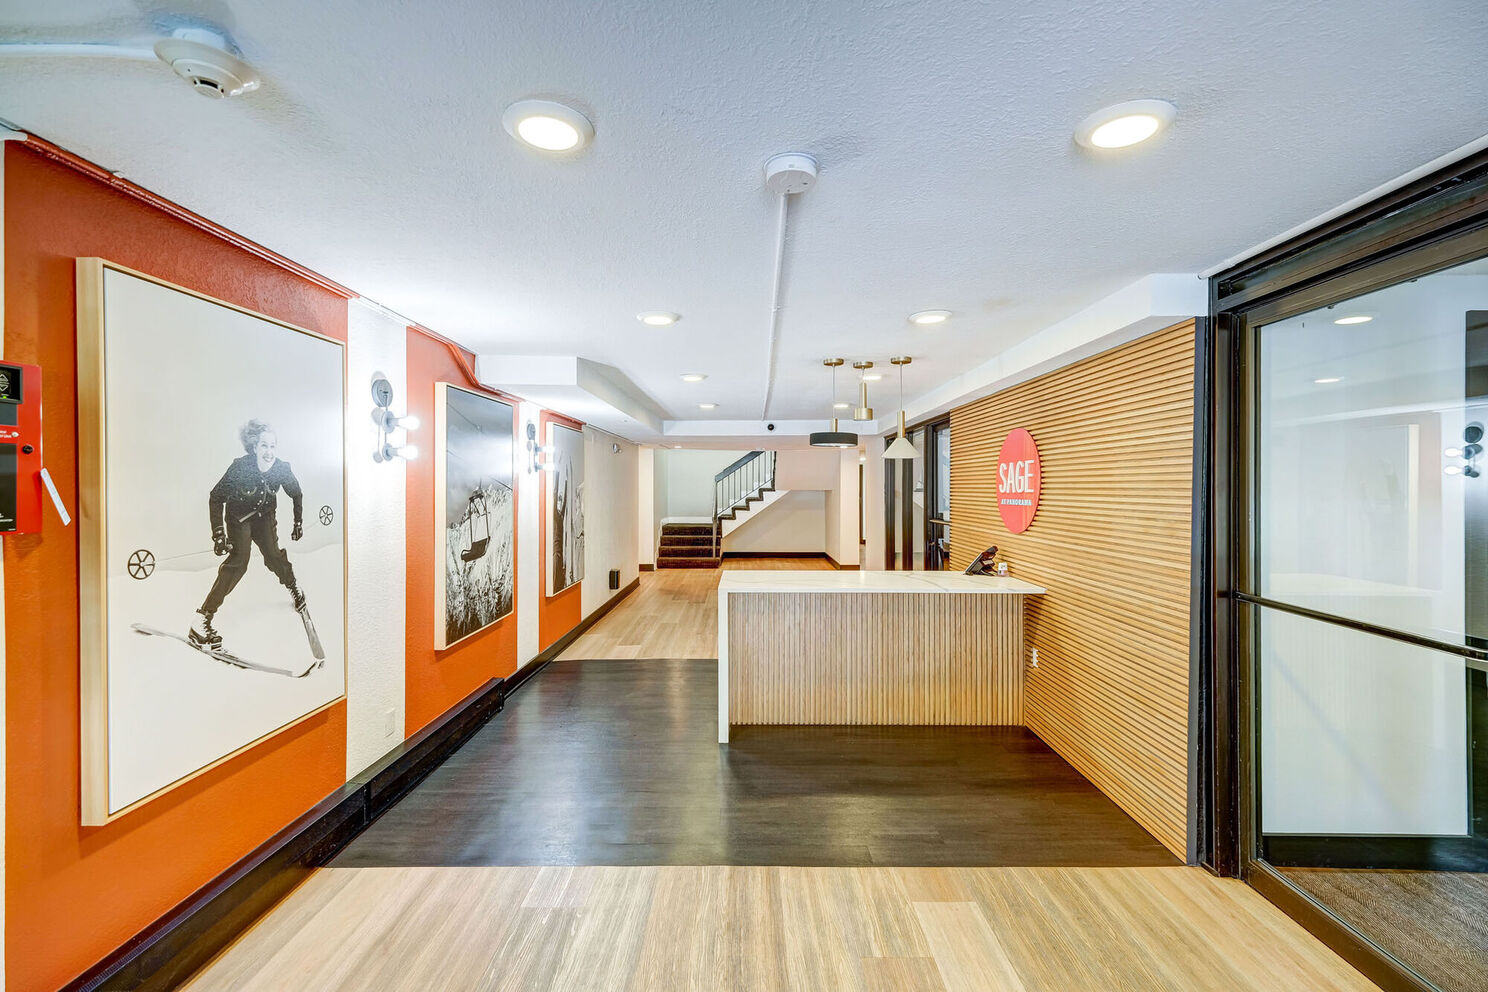 leasing office with decor and large wood slat wall